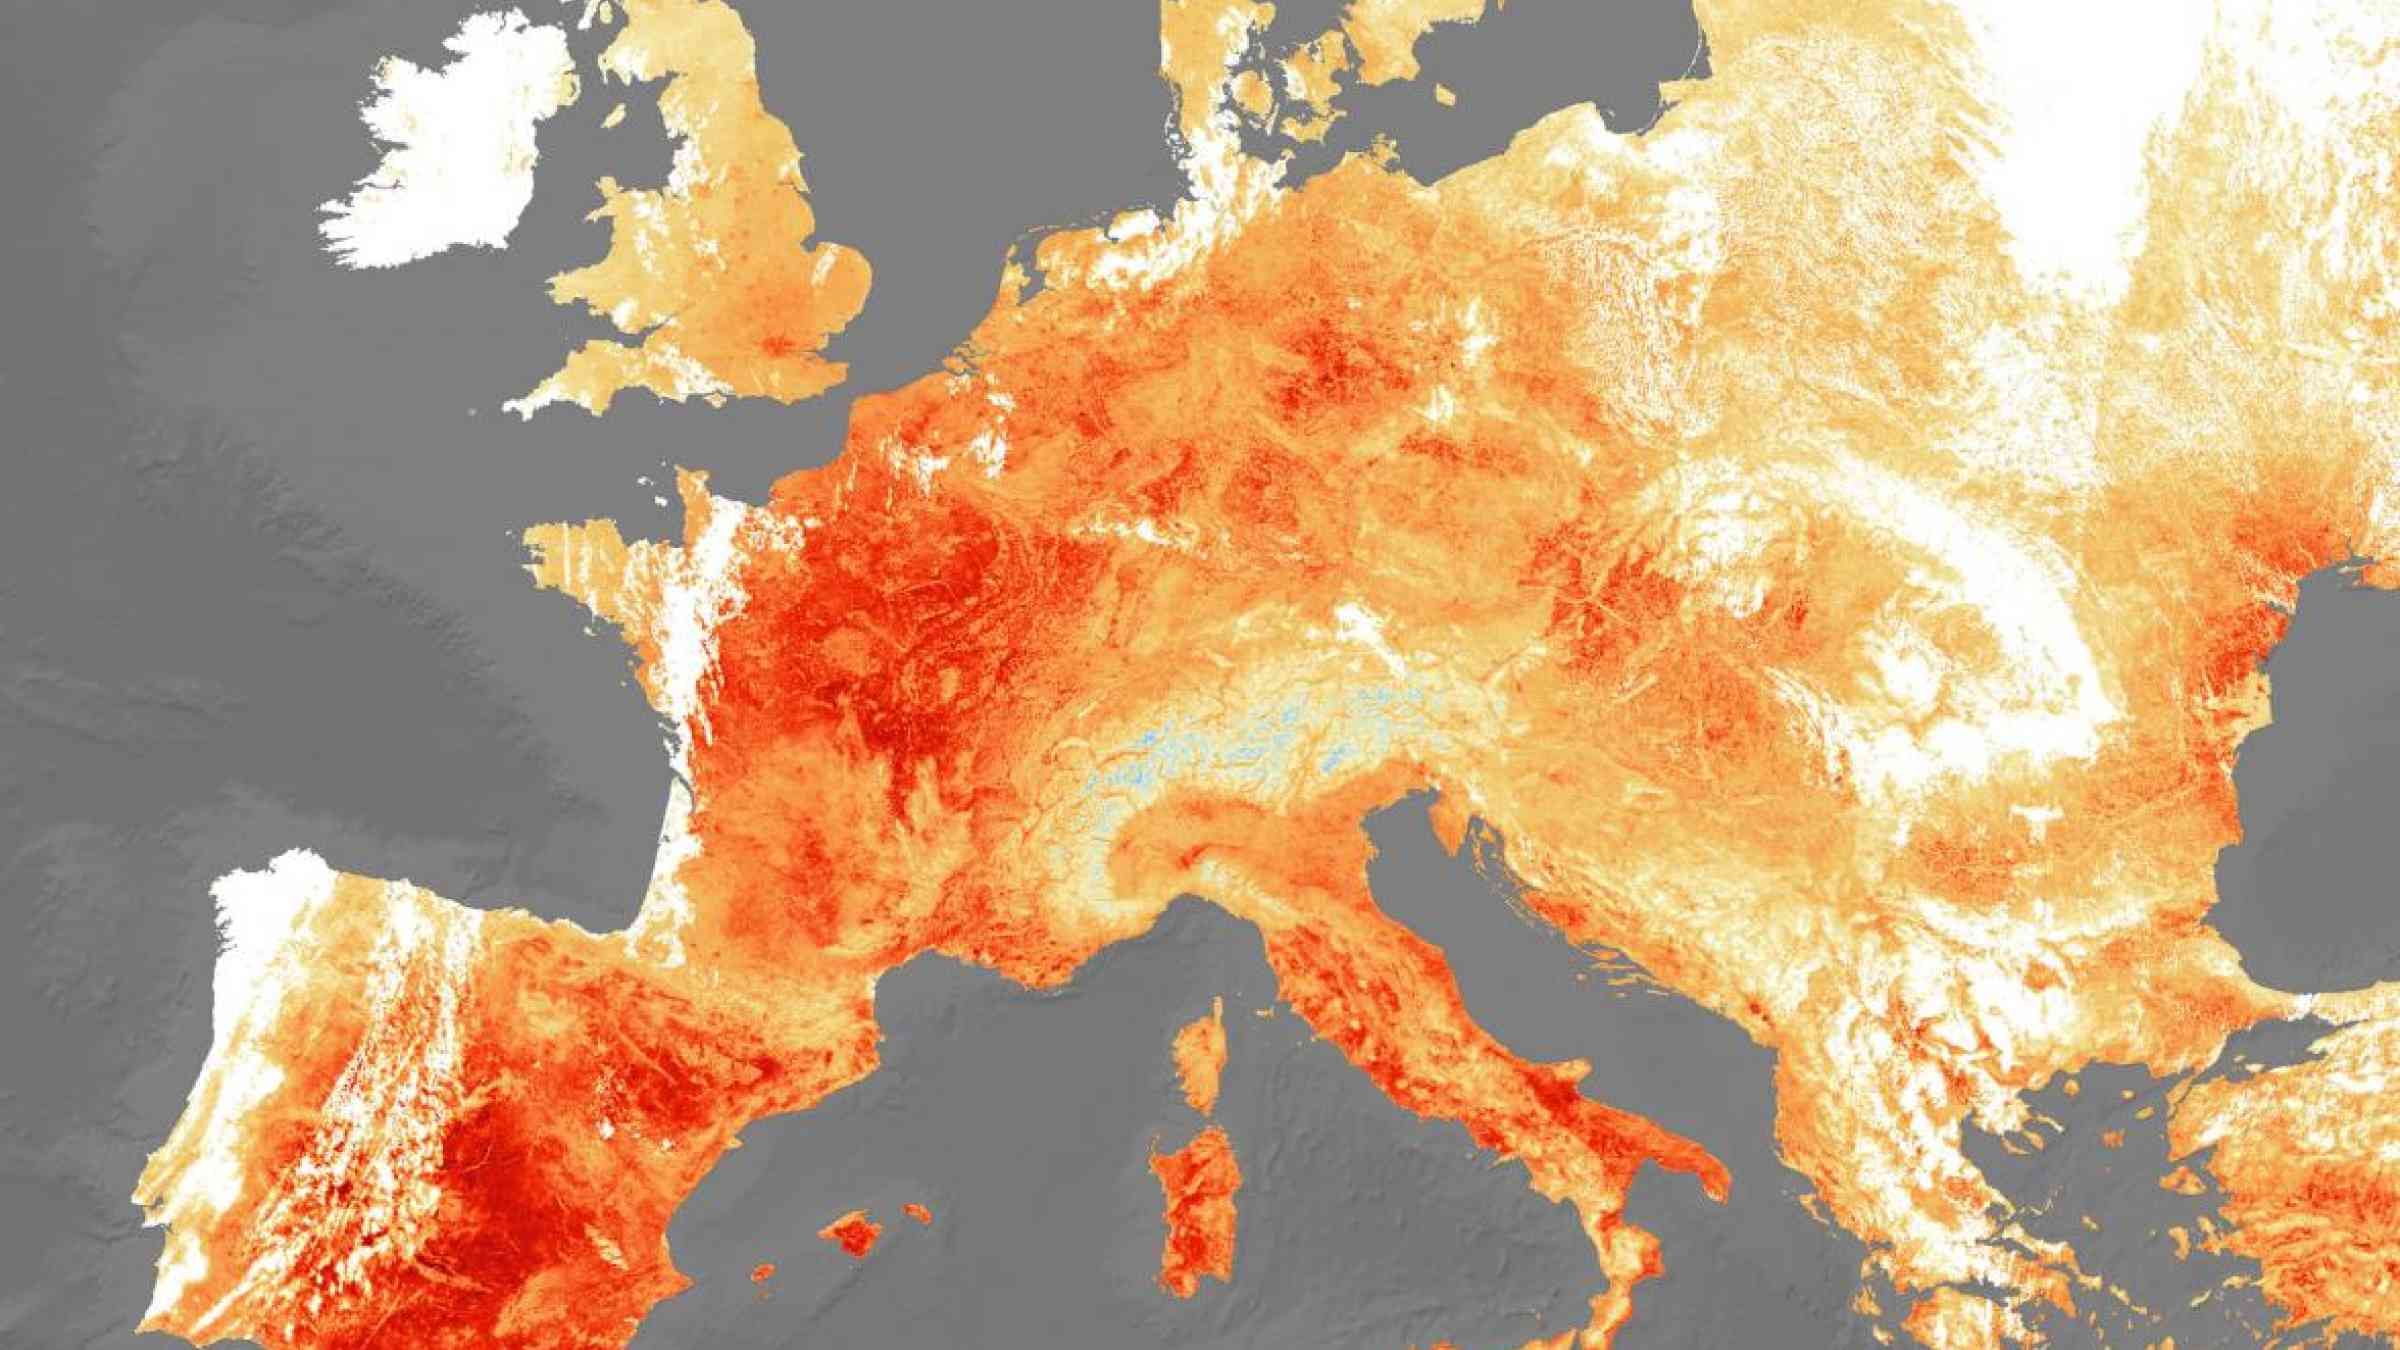 The naming and ranking heat waves will convey the true nature of the threat heat poses. European Space Agency, CC BY-SA 2.0